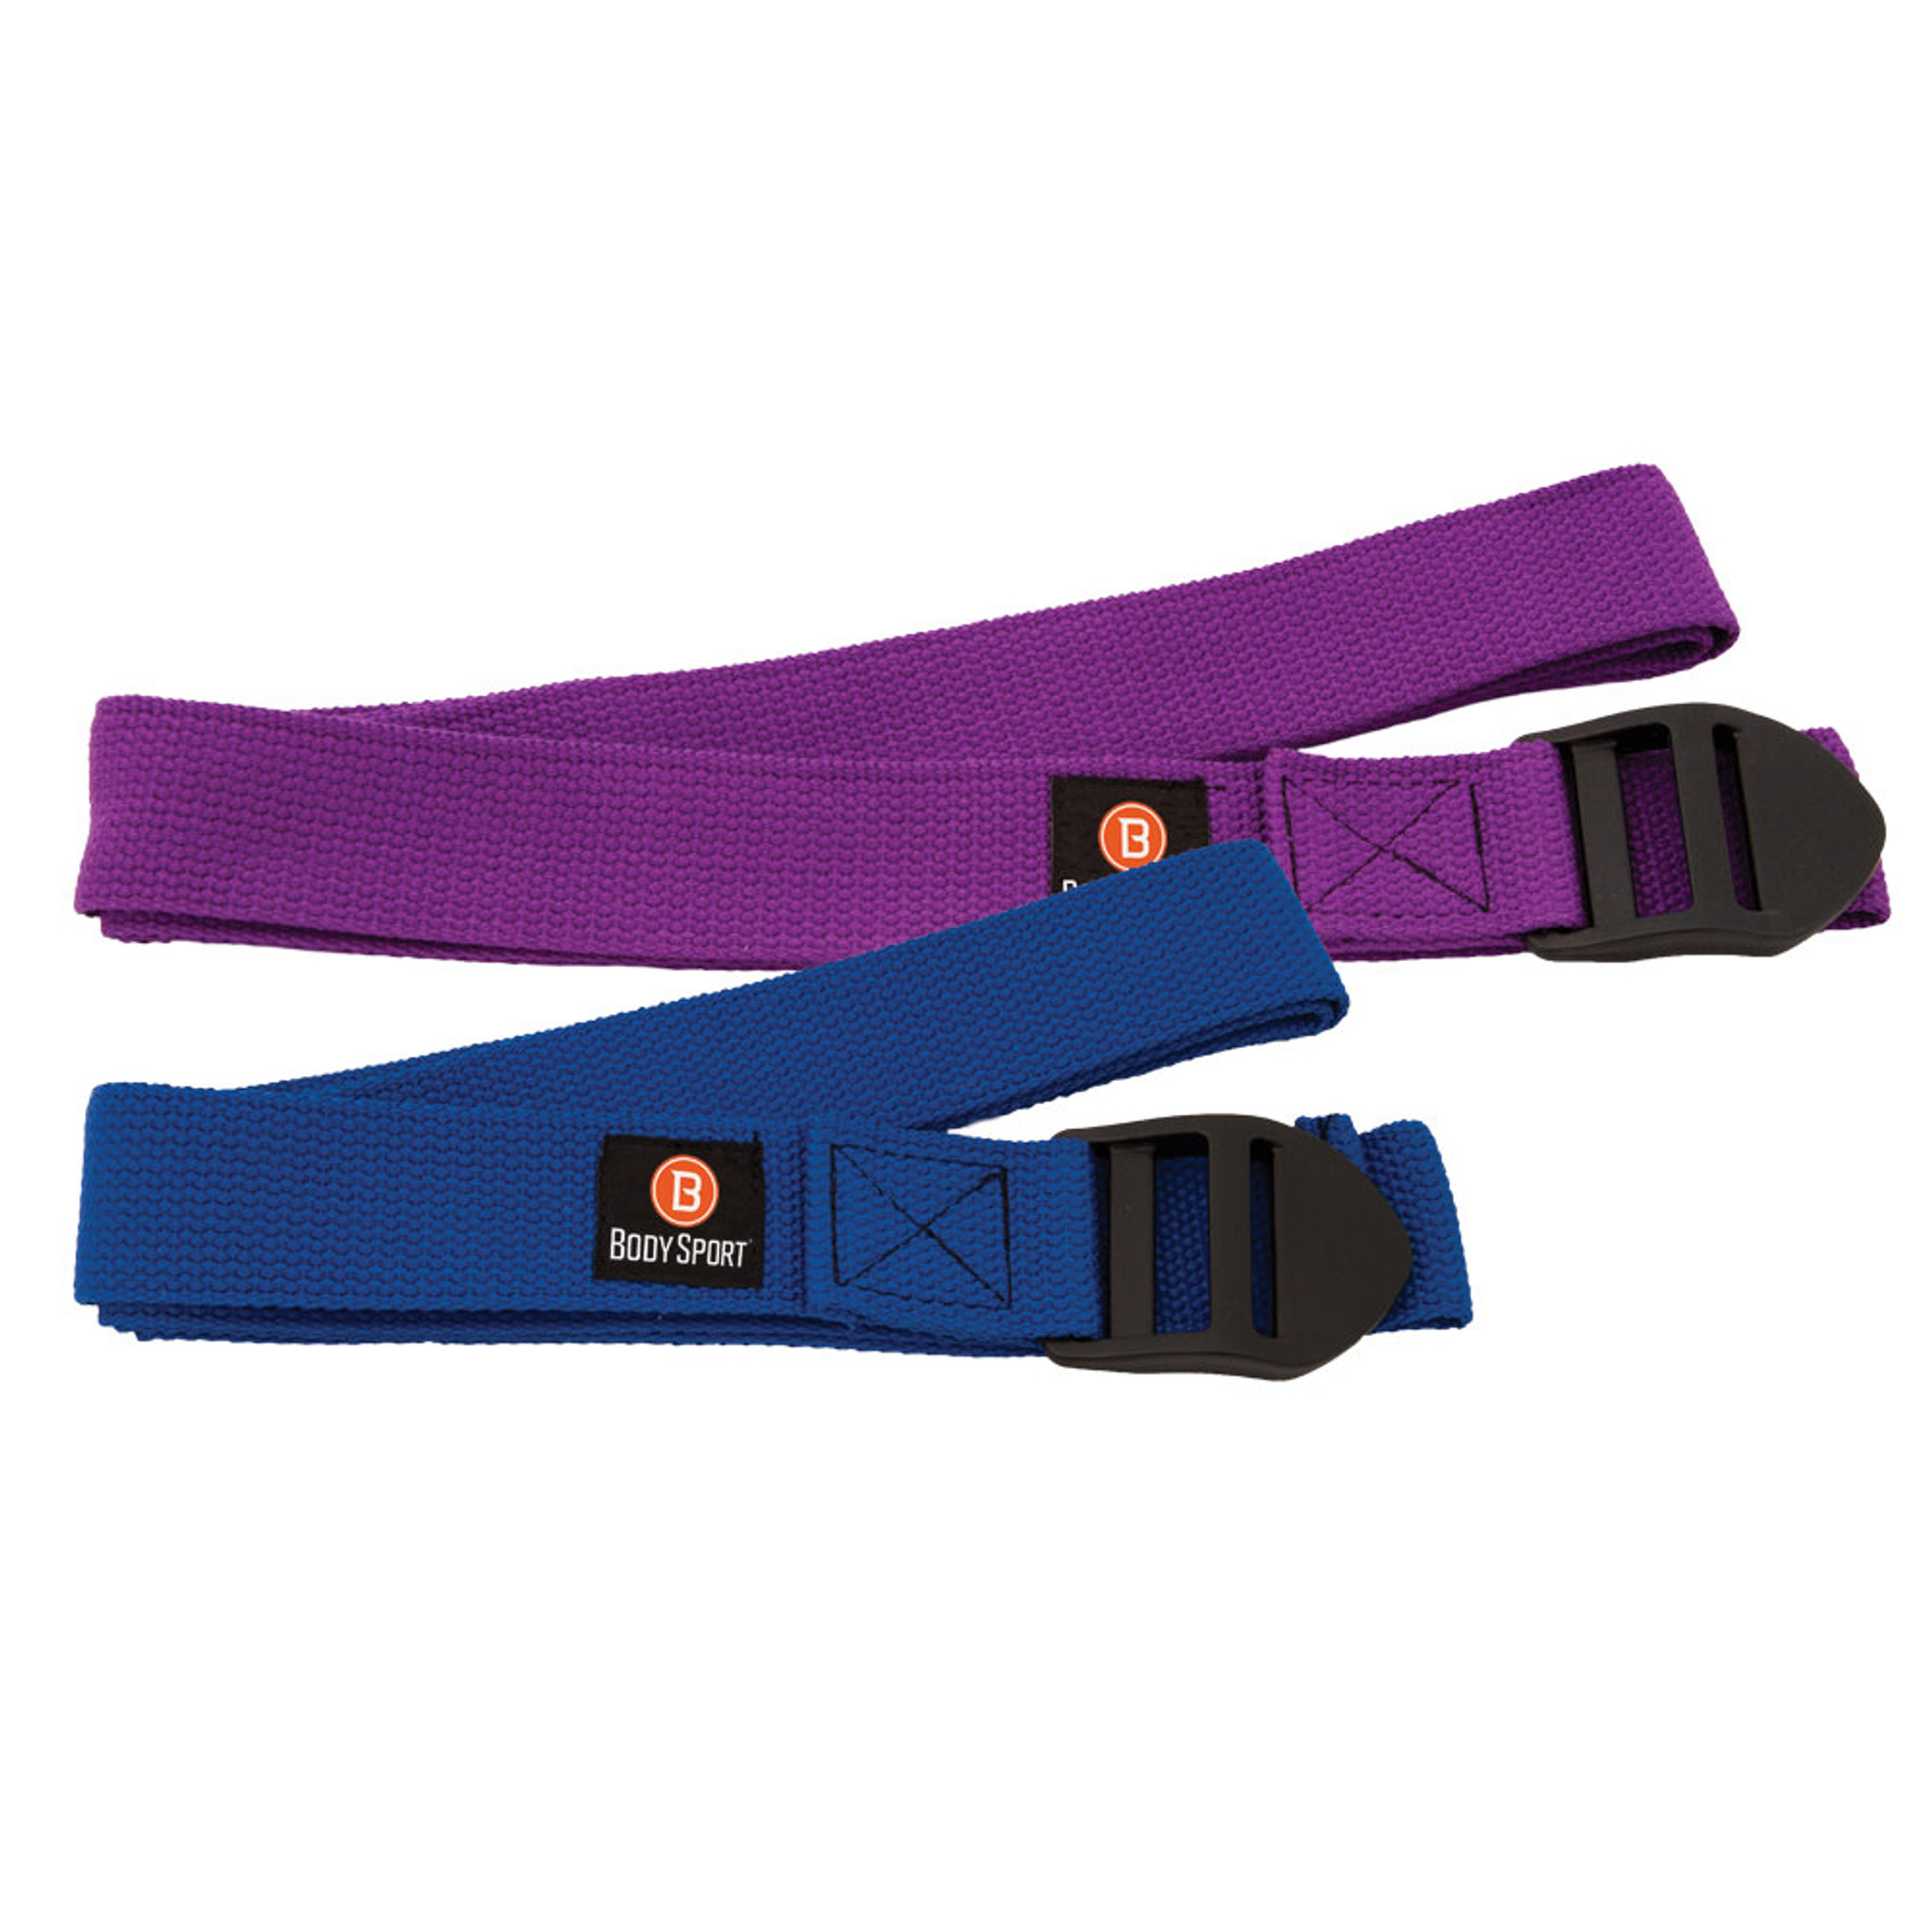 8 FOOT YOGA STRAP BLUE COTTON BLEND WITH PVC BUCKLE